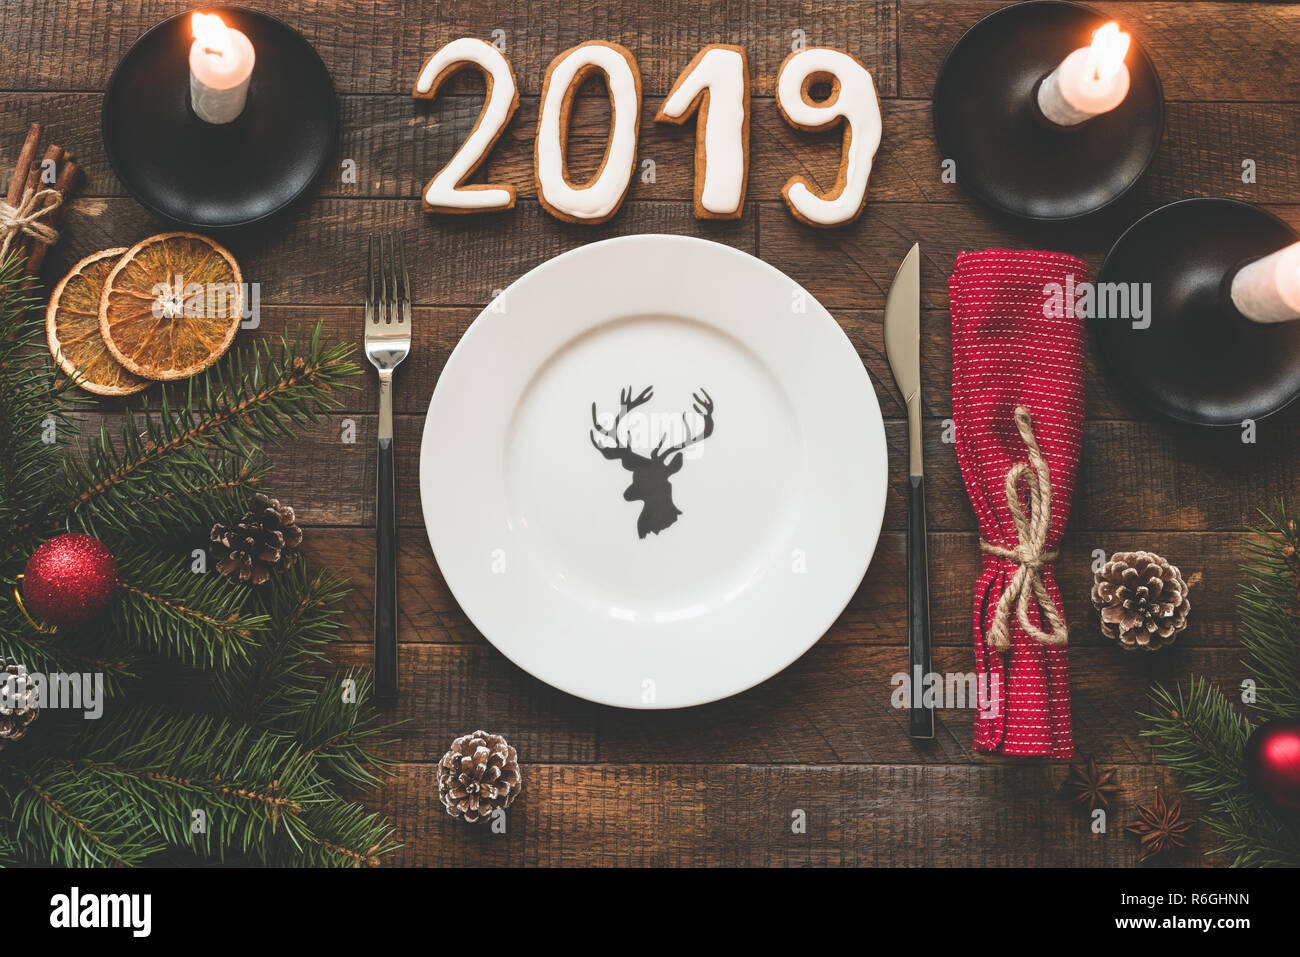 Table setting for Christmas or New Year 2019. Empty plate, silverware, red textile and candles on rustic wooden background Stock Photo